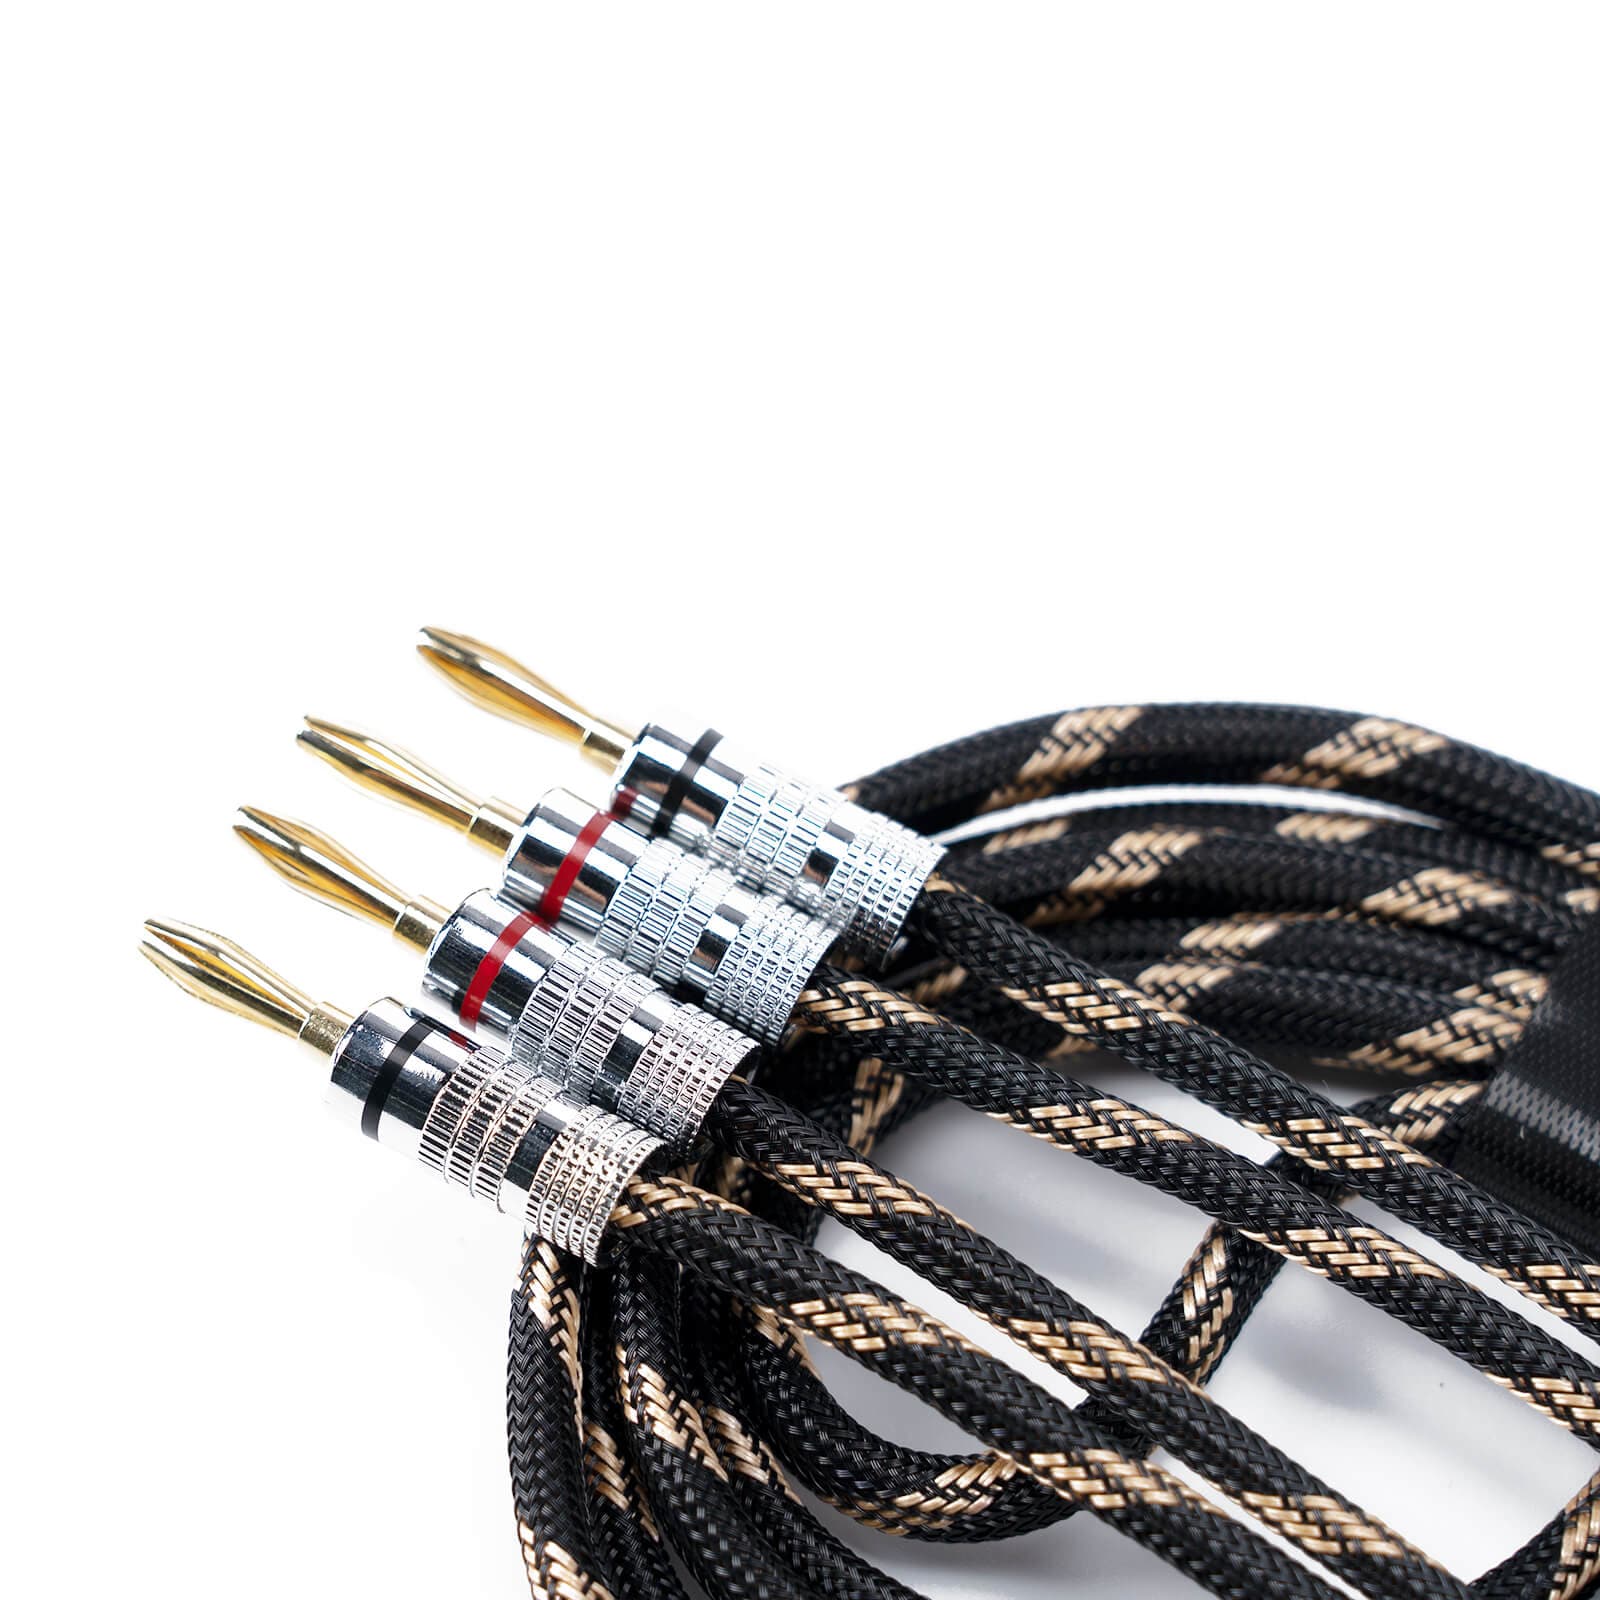 Fosi Audio 2-Pack of Nylon Braided Hi-Fi Speaker Cable Wire with Gold-Plated Banana Tip Plugs - 5.9ft/1.8M Each